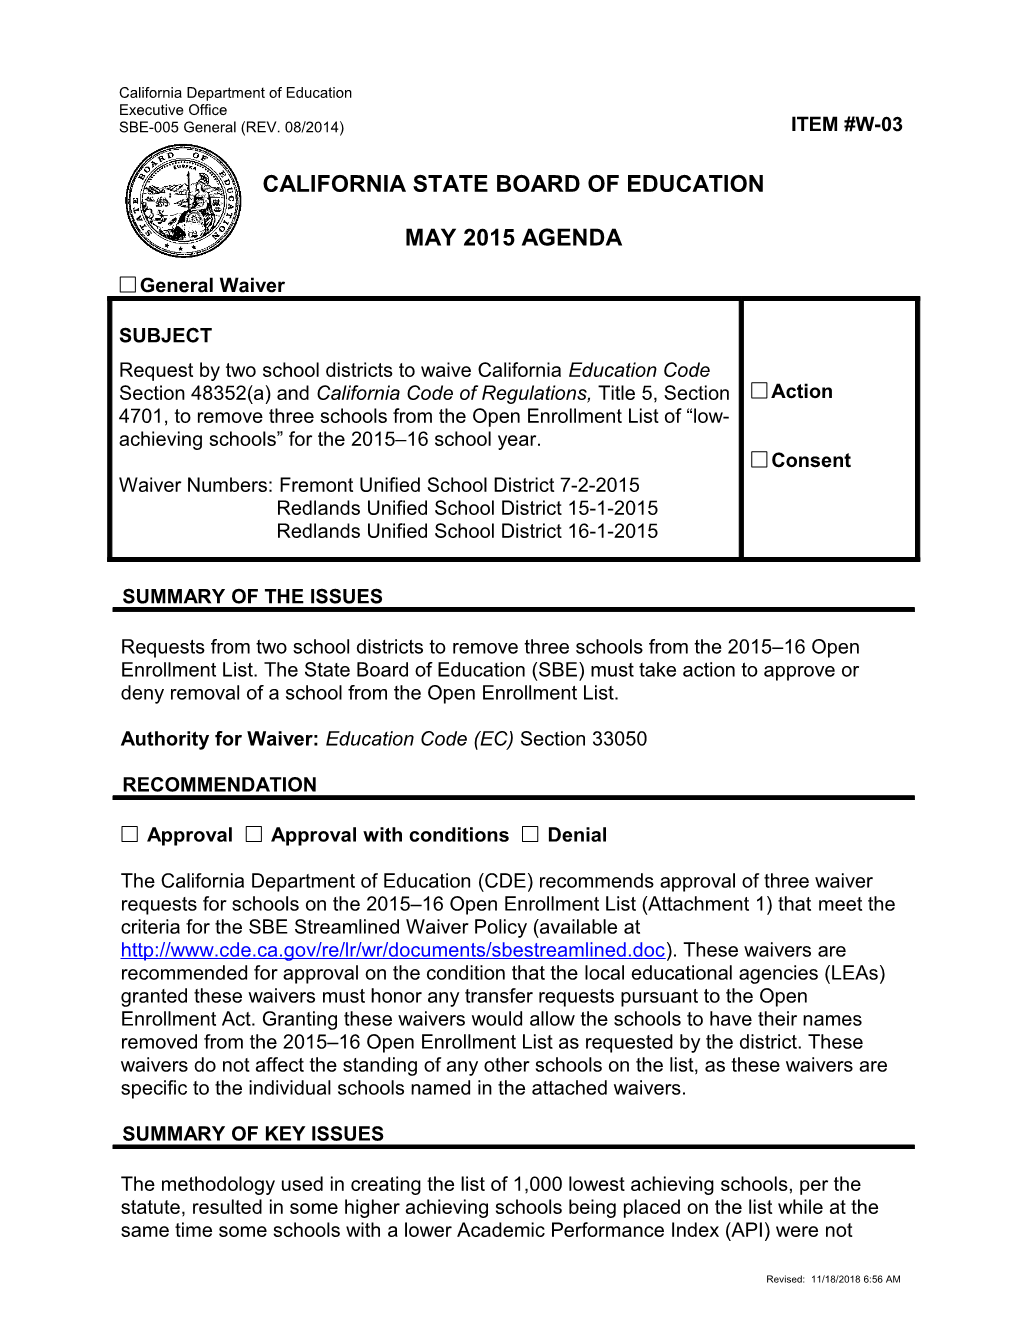 May 2015 Waiver Item W-03 - Meeting Agendas (CA State Board of Education)